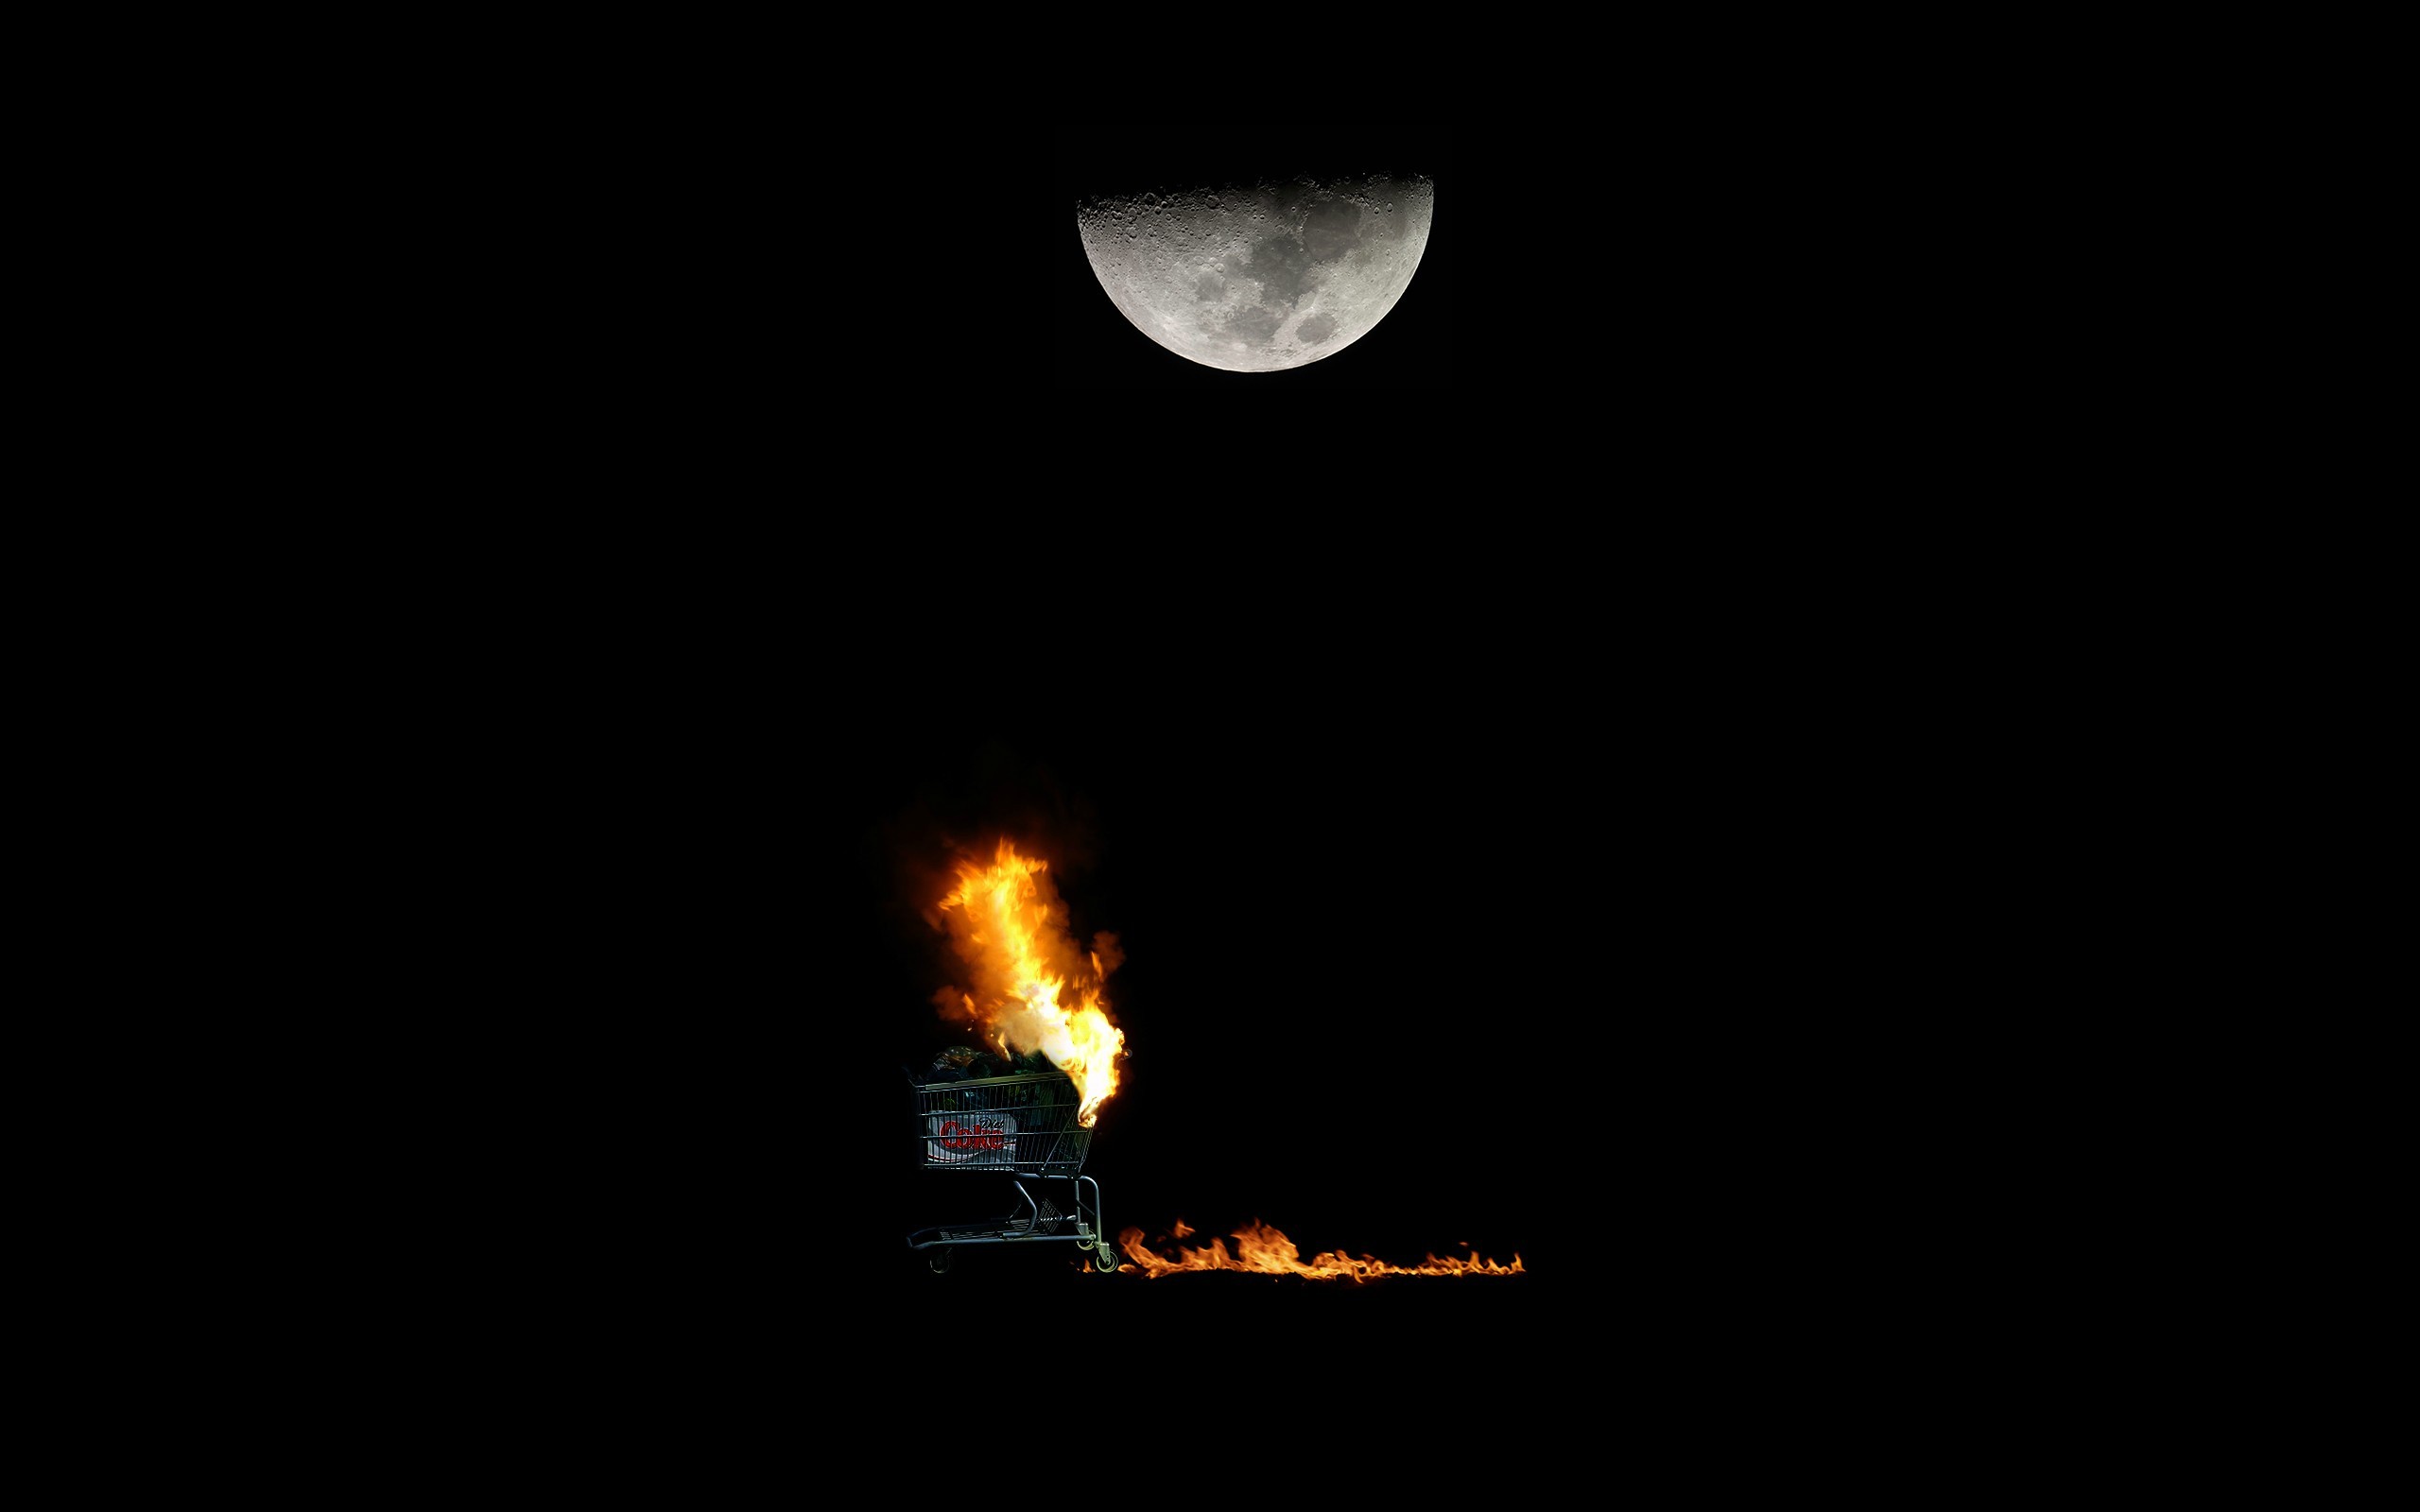 General 2560x1600 night abstract Moon fire minimalism shopping cart burning simple background black background